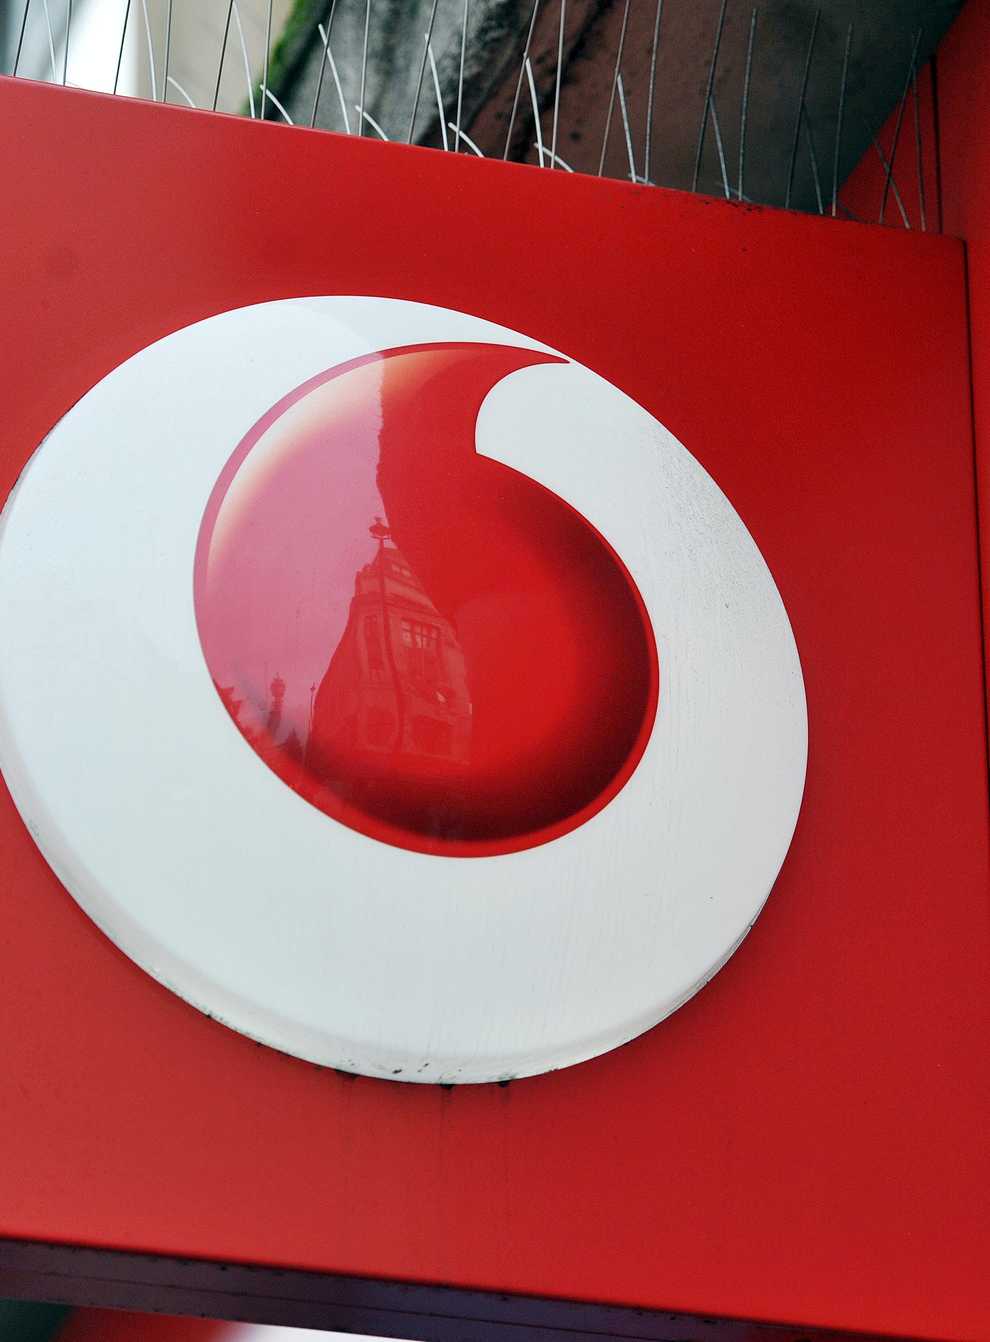 Mobile phone giant Vodafone has unveiled plans to cut costs by one billion euros (£880 million) which could lead to jobs being lost (Nicholas T Ansell/ PA)